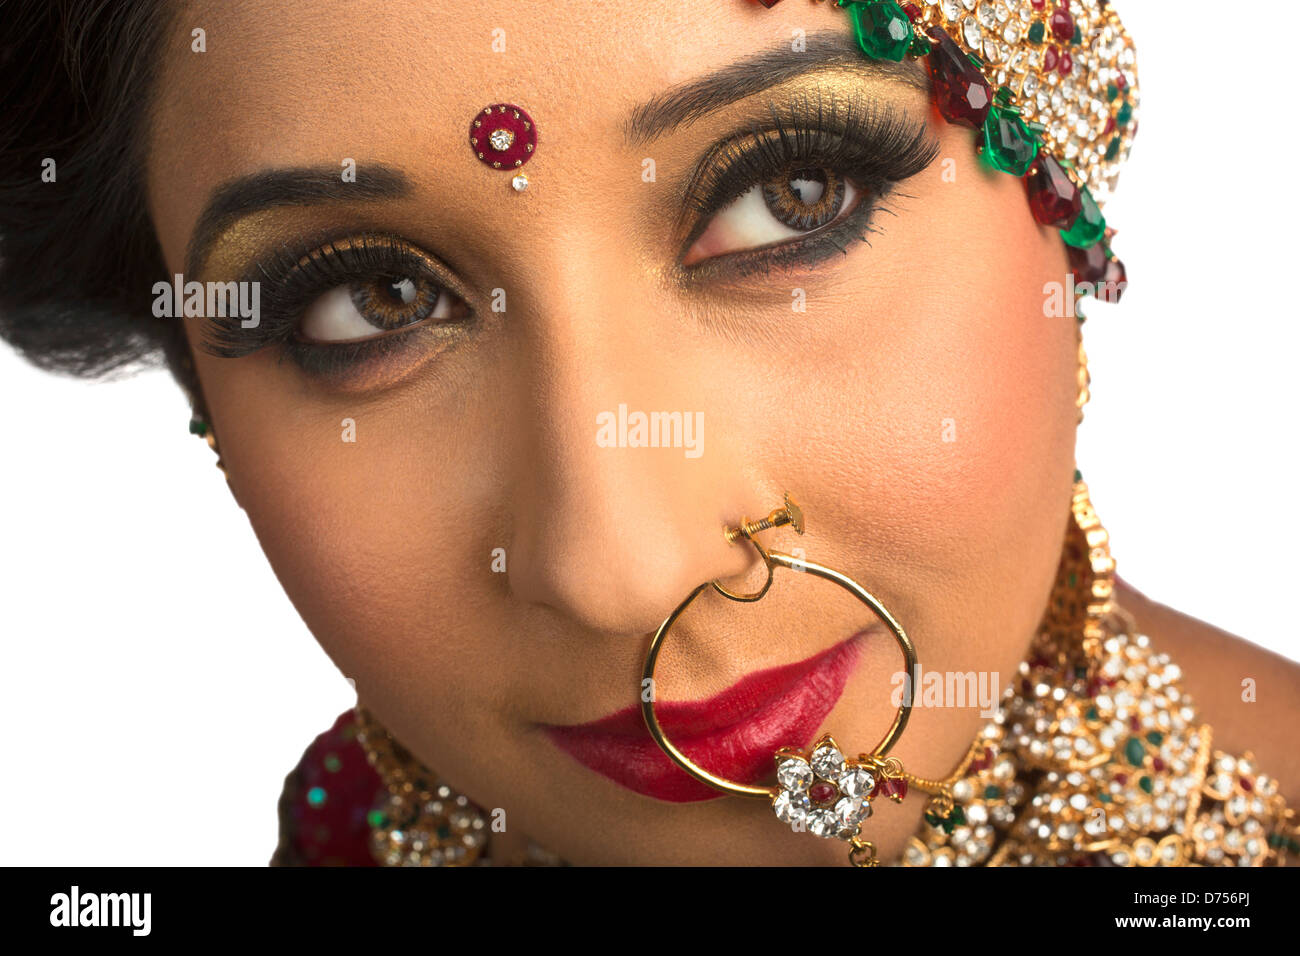 Indian Bride Wearing Nose Rings Her Stock Photo 1517200754 | Shutterstock